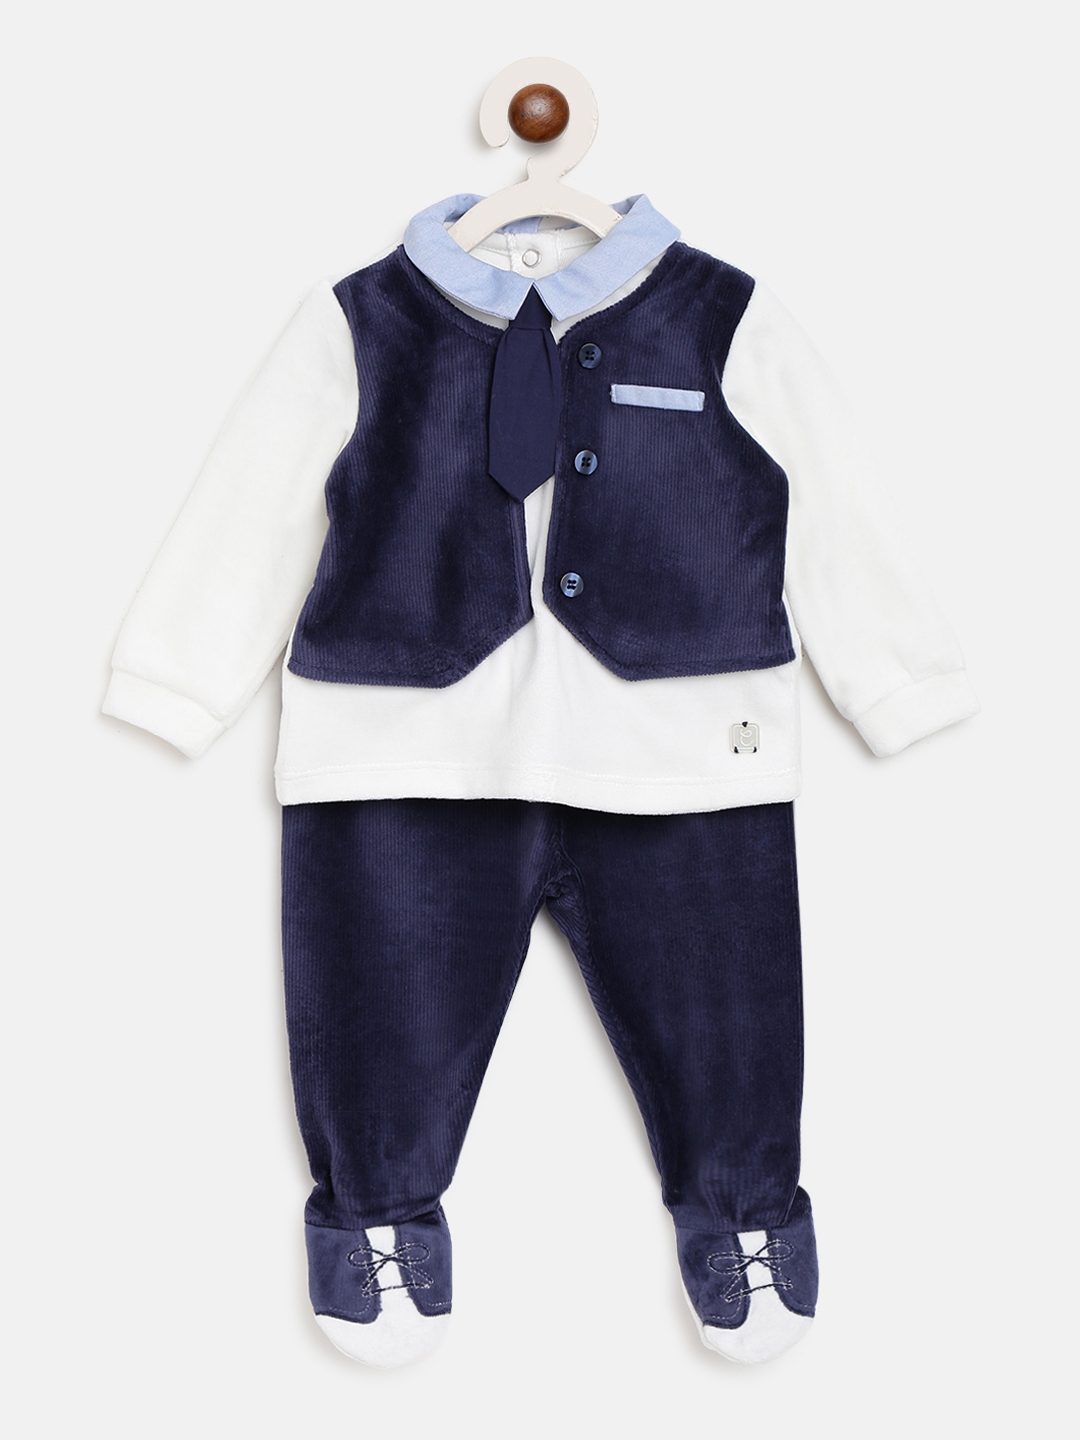 Buy Chicco Infant Boys Navy Blue & White Solid Clothing Set - Clothing ...